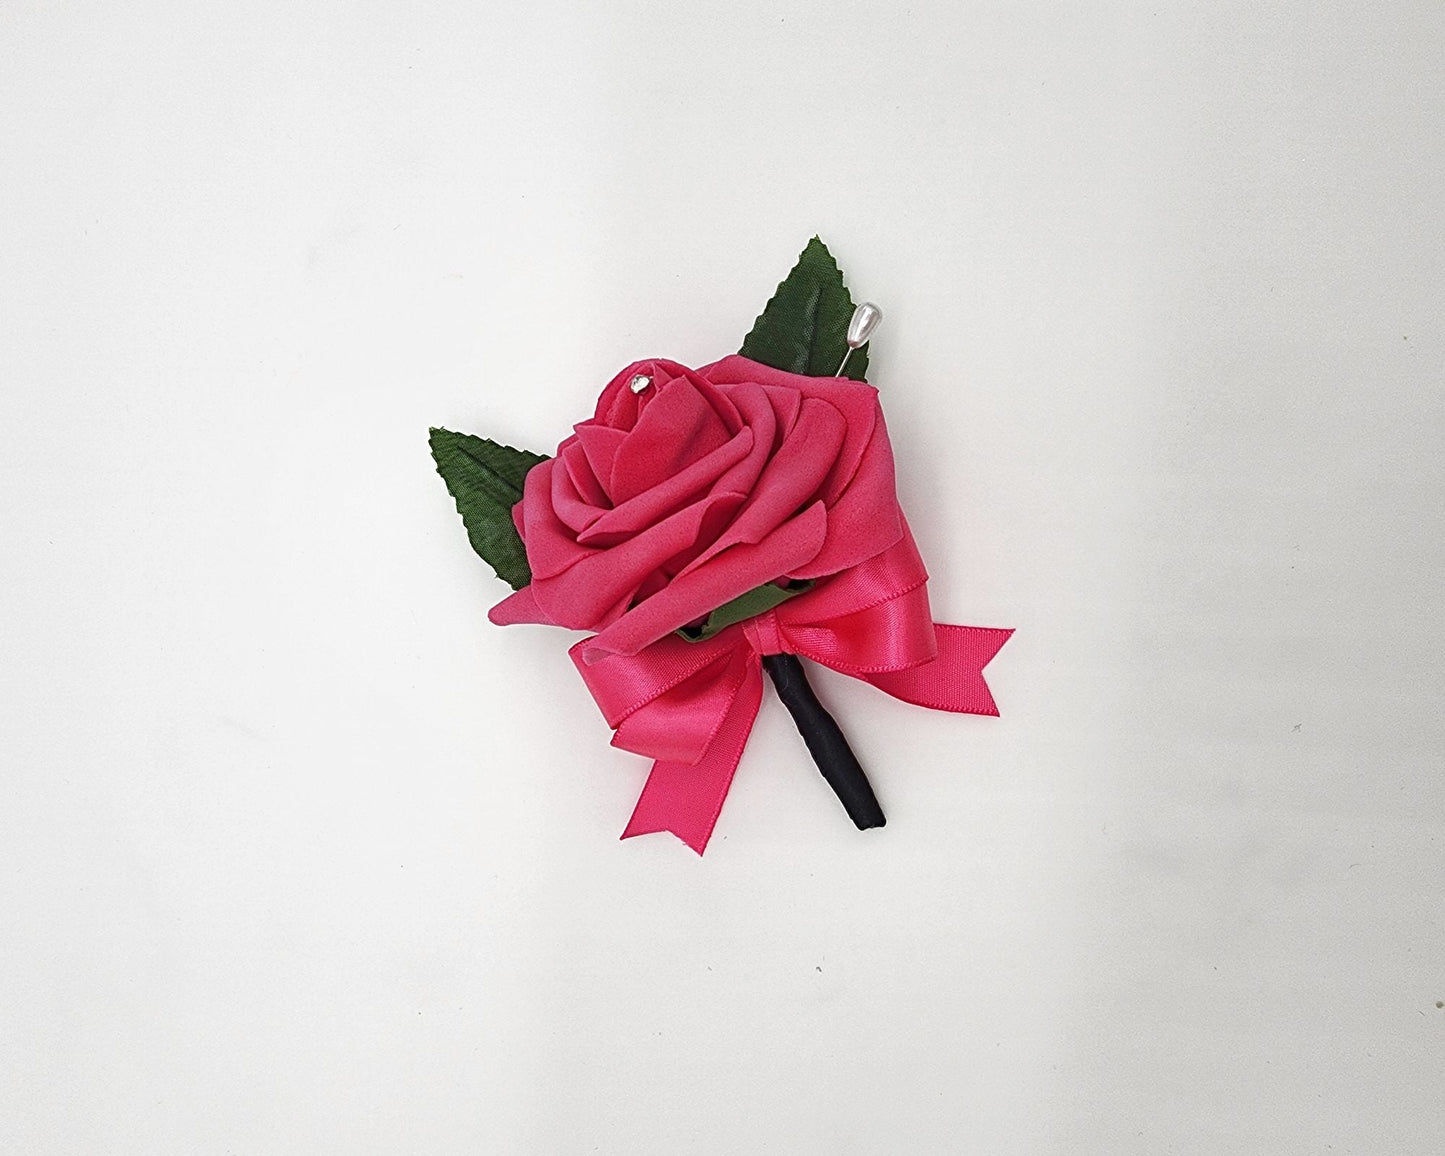 Hot Pink and Black Boutonnieres and Corsages